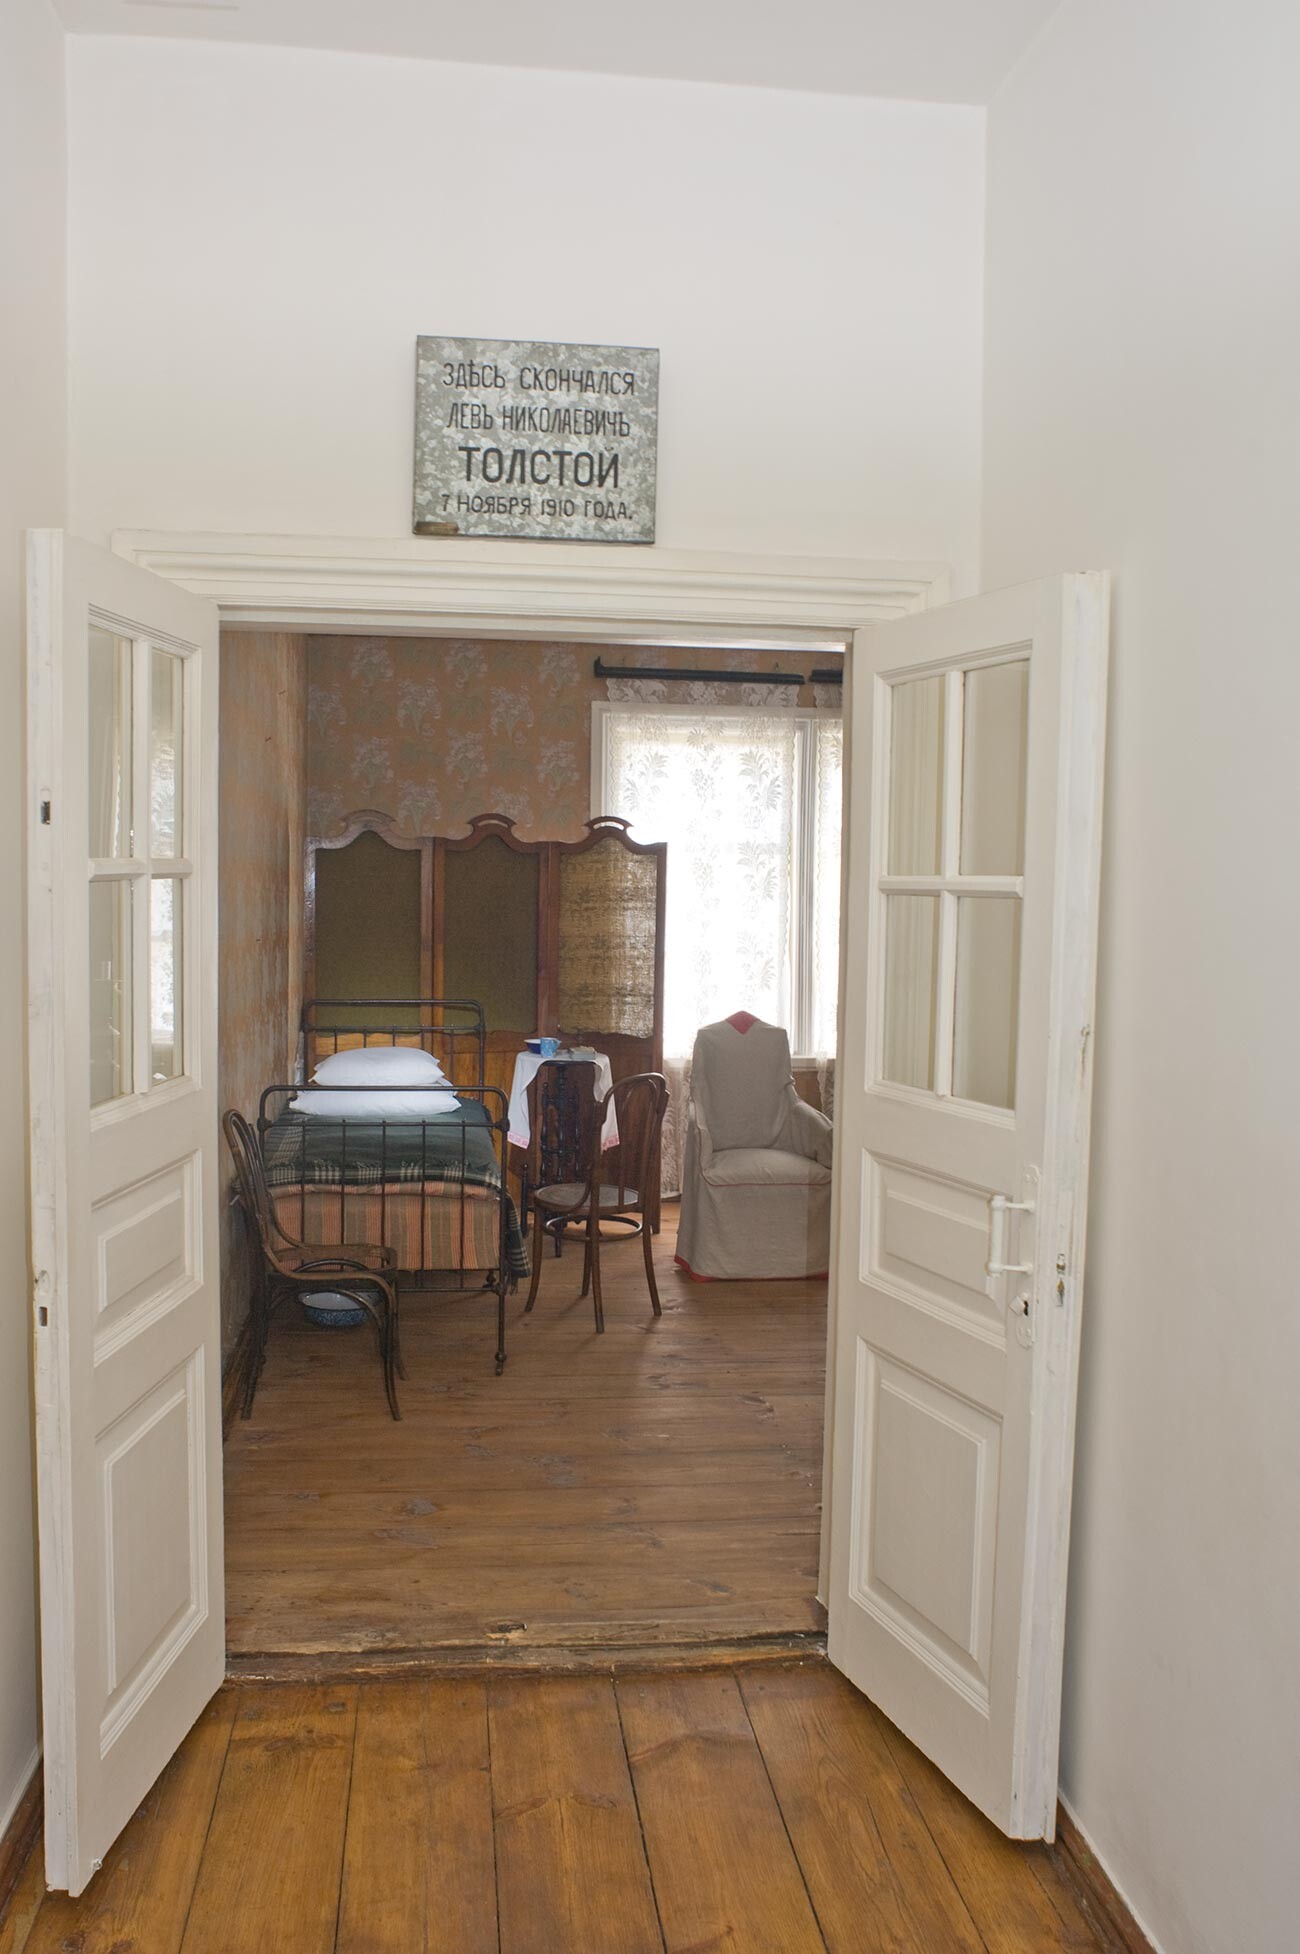 Stationmaster's house, interior. View toward room where Tolstoy stayed. Memorial sign was placed over doorway soon after his death. August 10, 2013